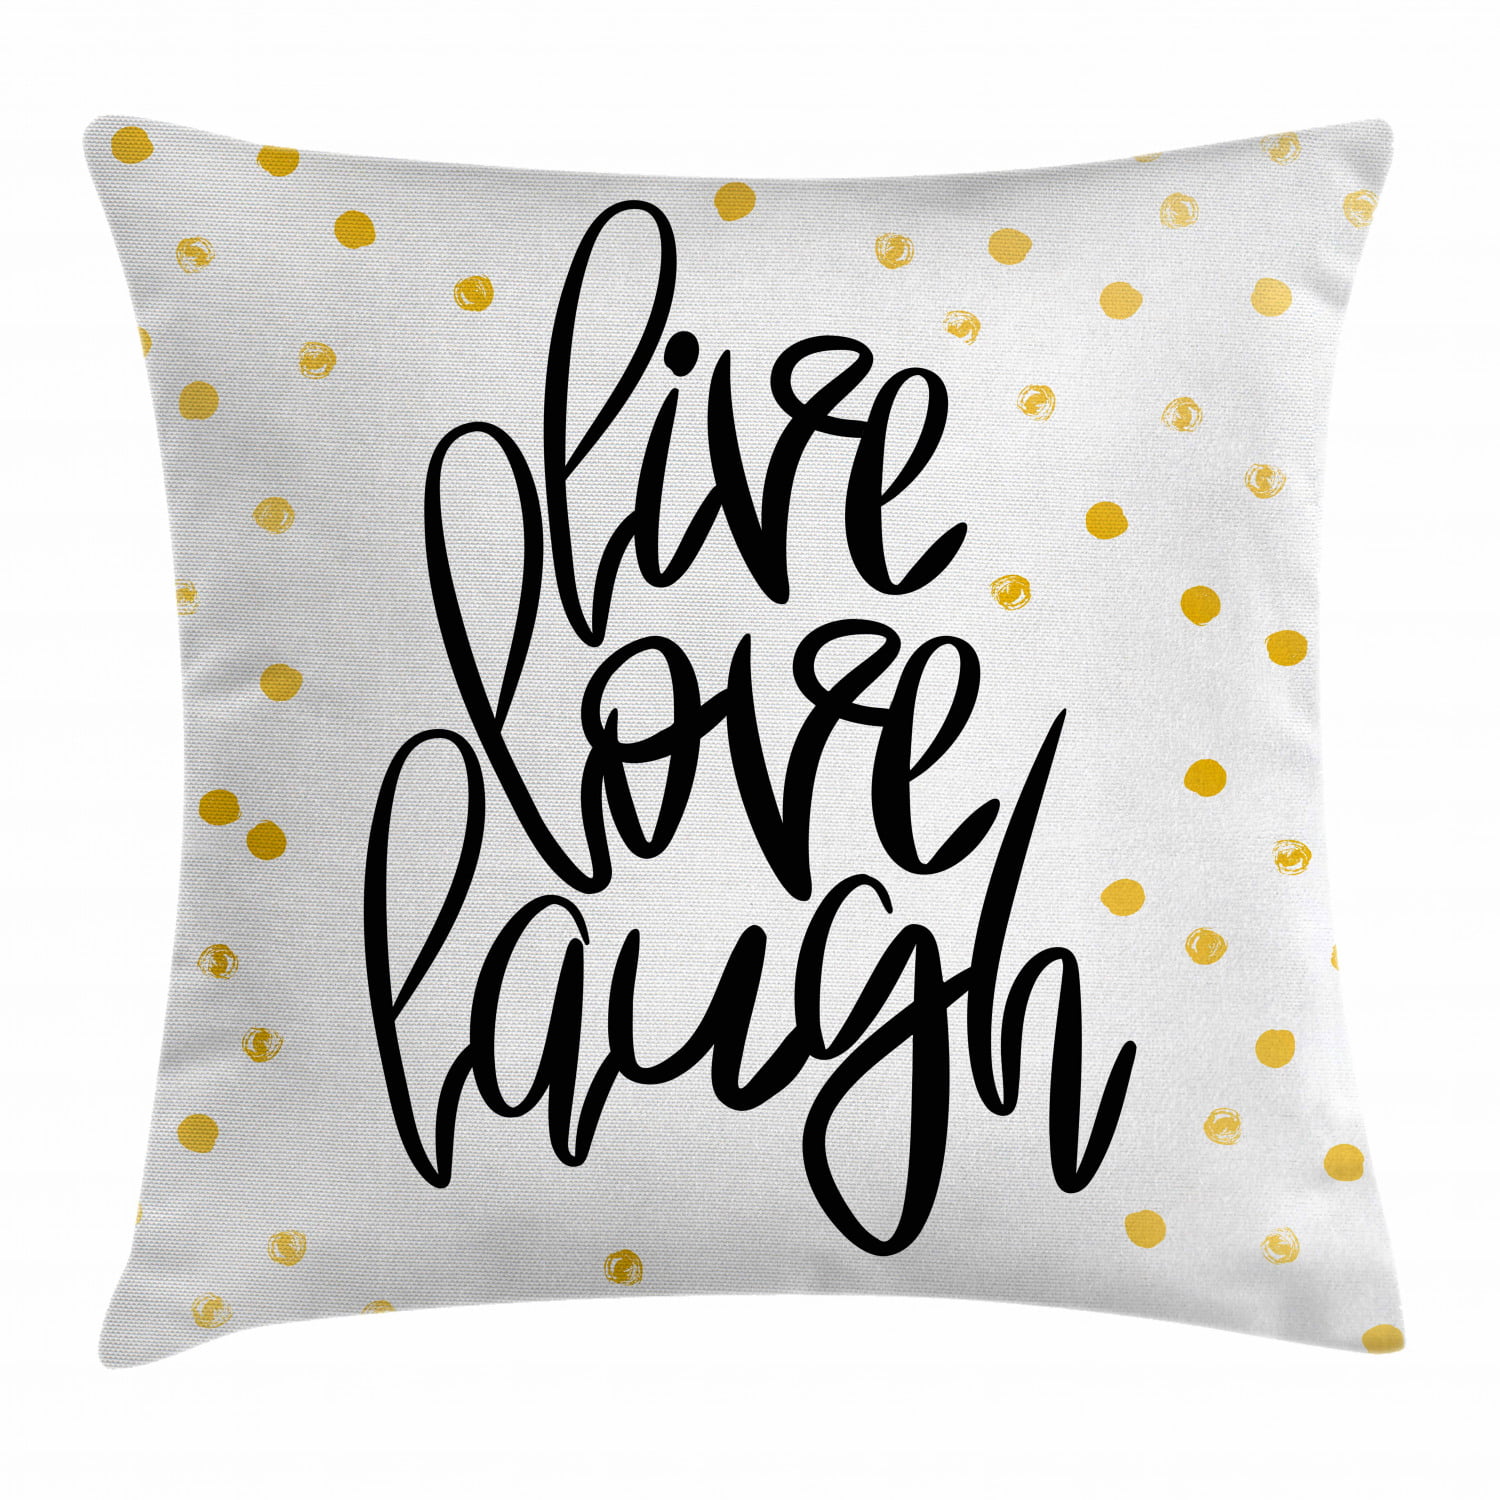 Live Laugh Love Decor Throw Pillow Cushion Cover, Stylized Hand ...